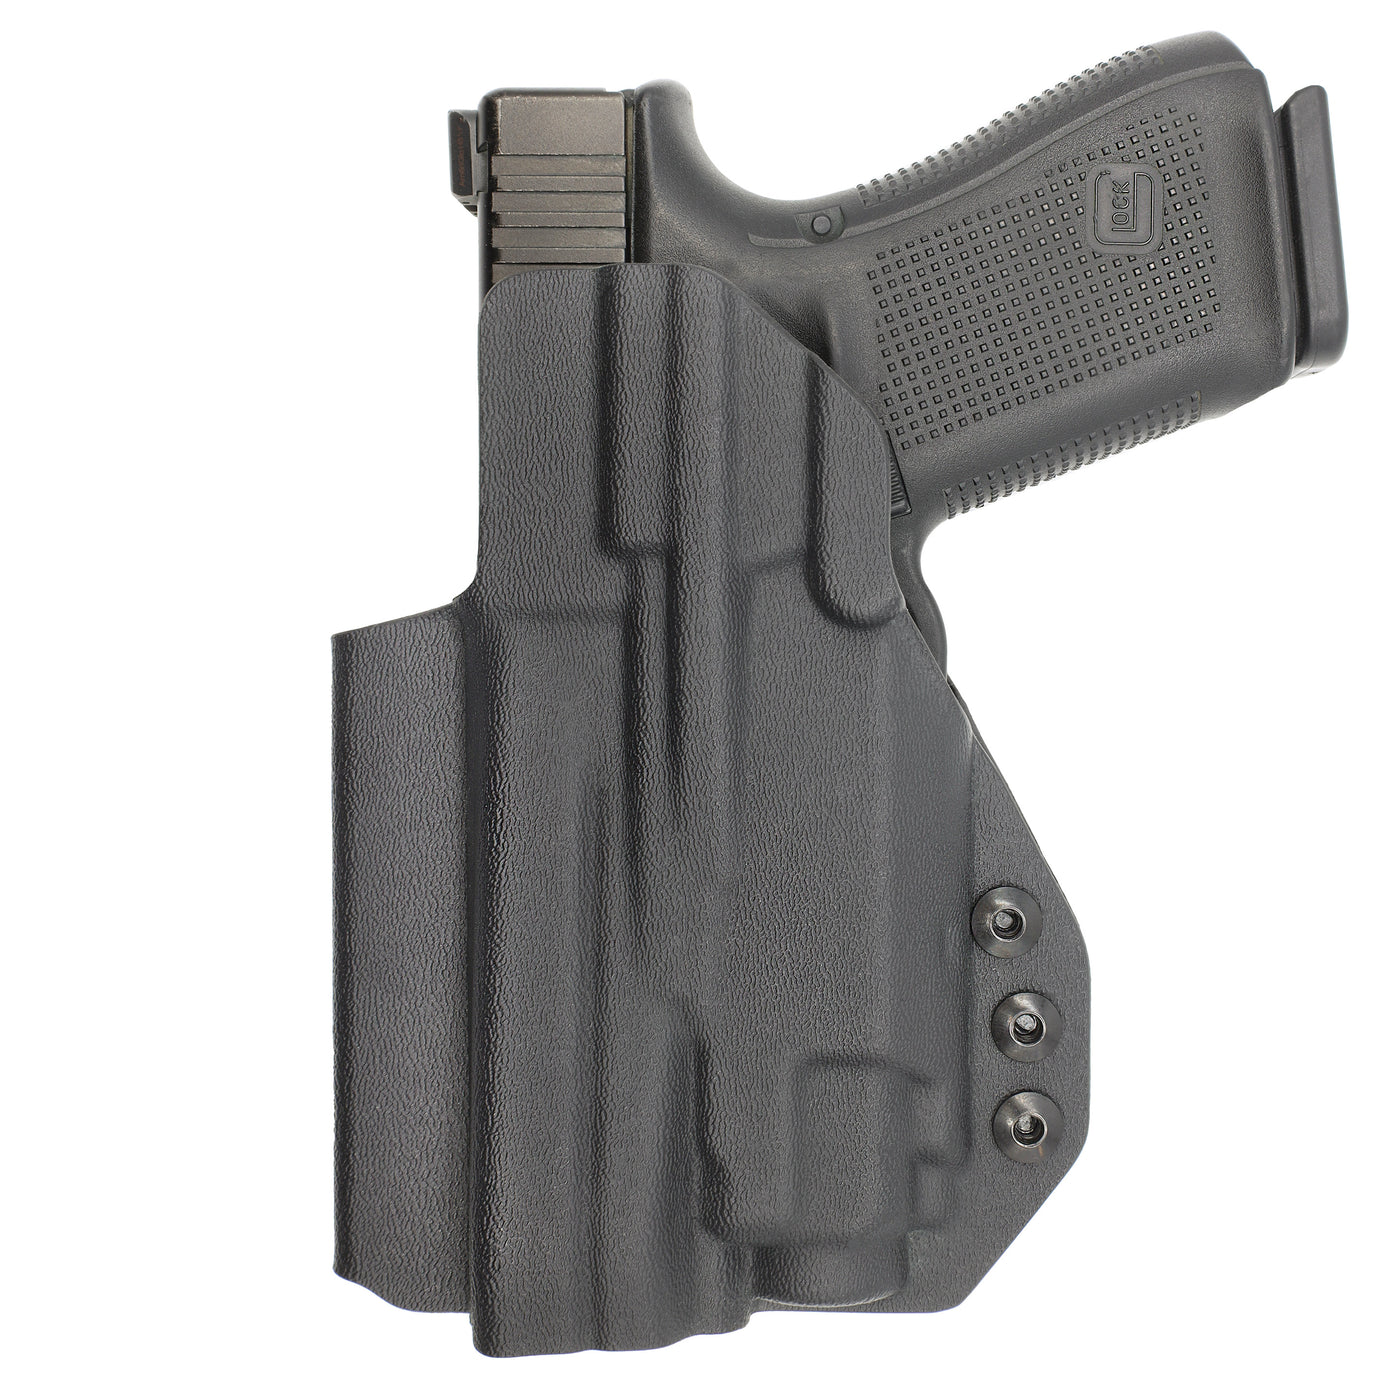 C&G Holsters custom IWB Tactical Poly80 streamlight TLR8 holstered back view